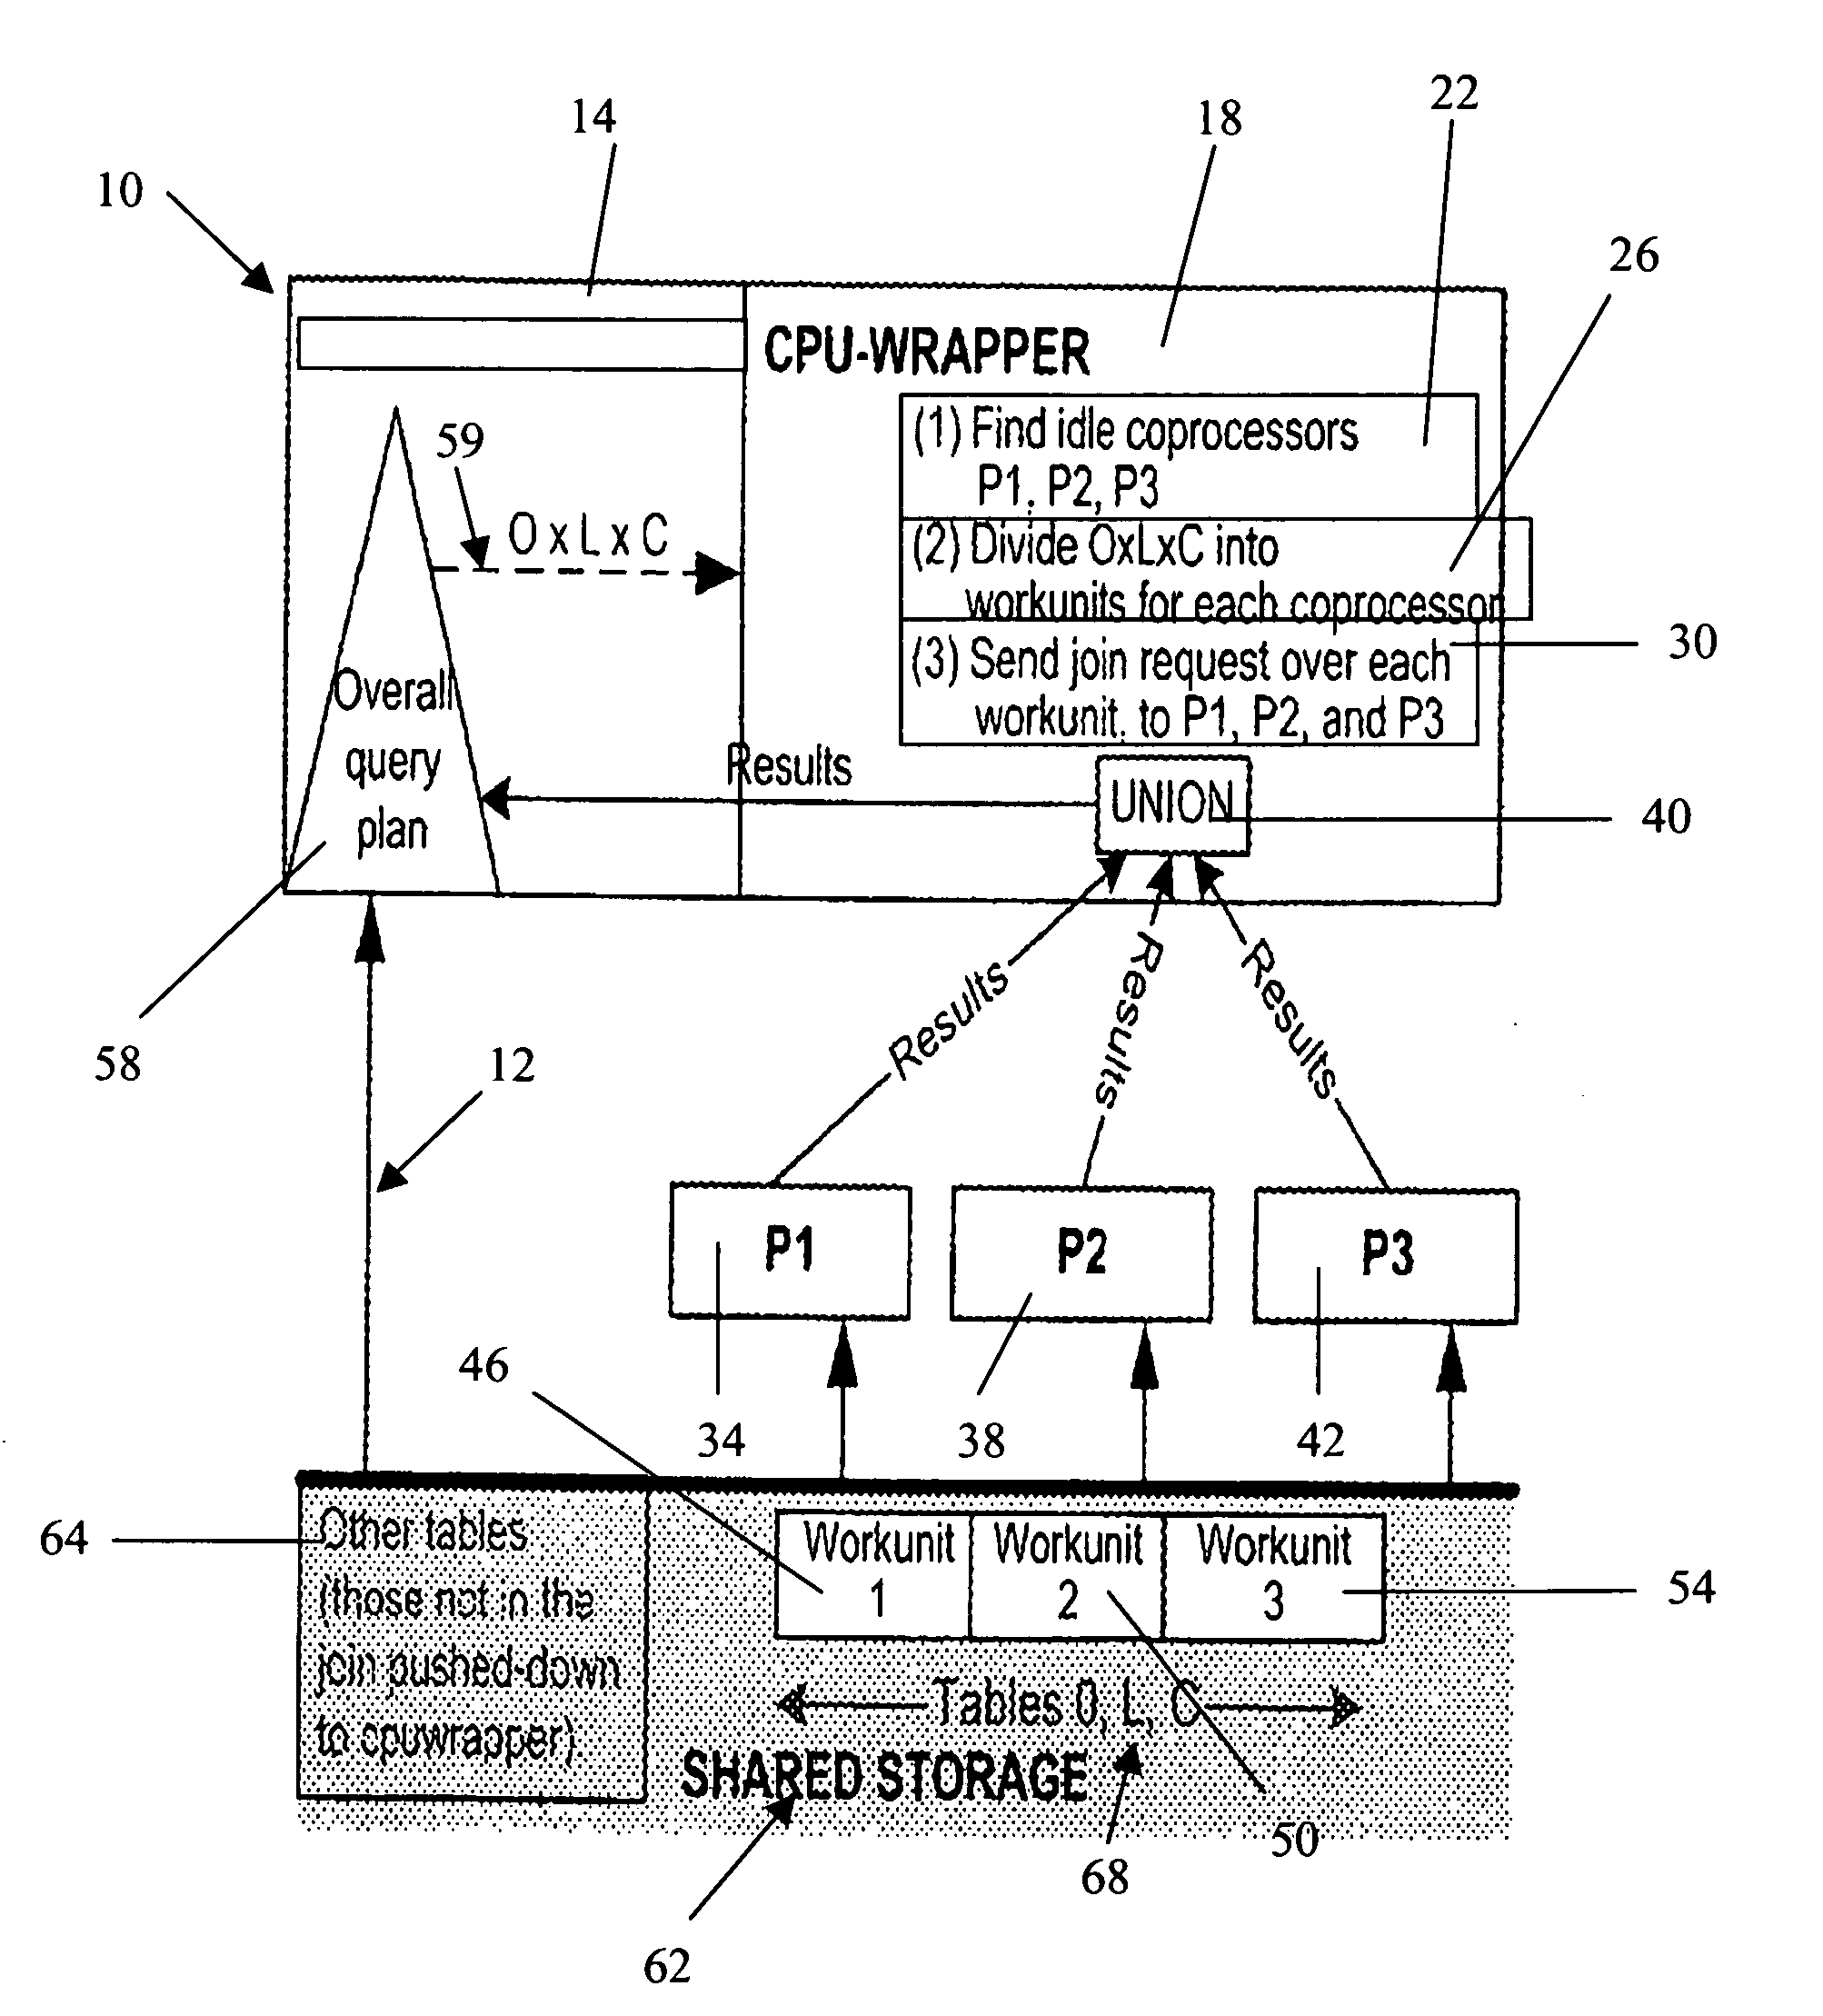 Method for parallel query processing with non-dedicated, heterogeneous computers that is resilient to load bursts and node failures